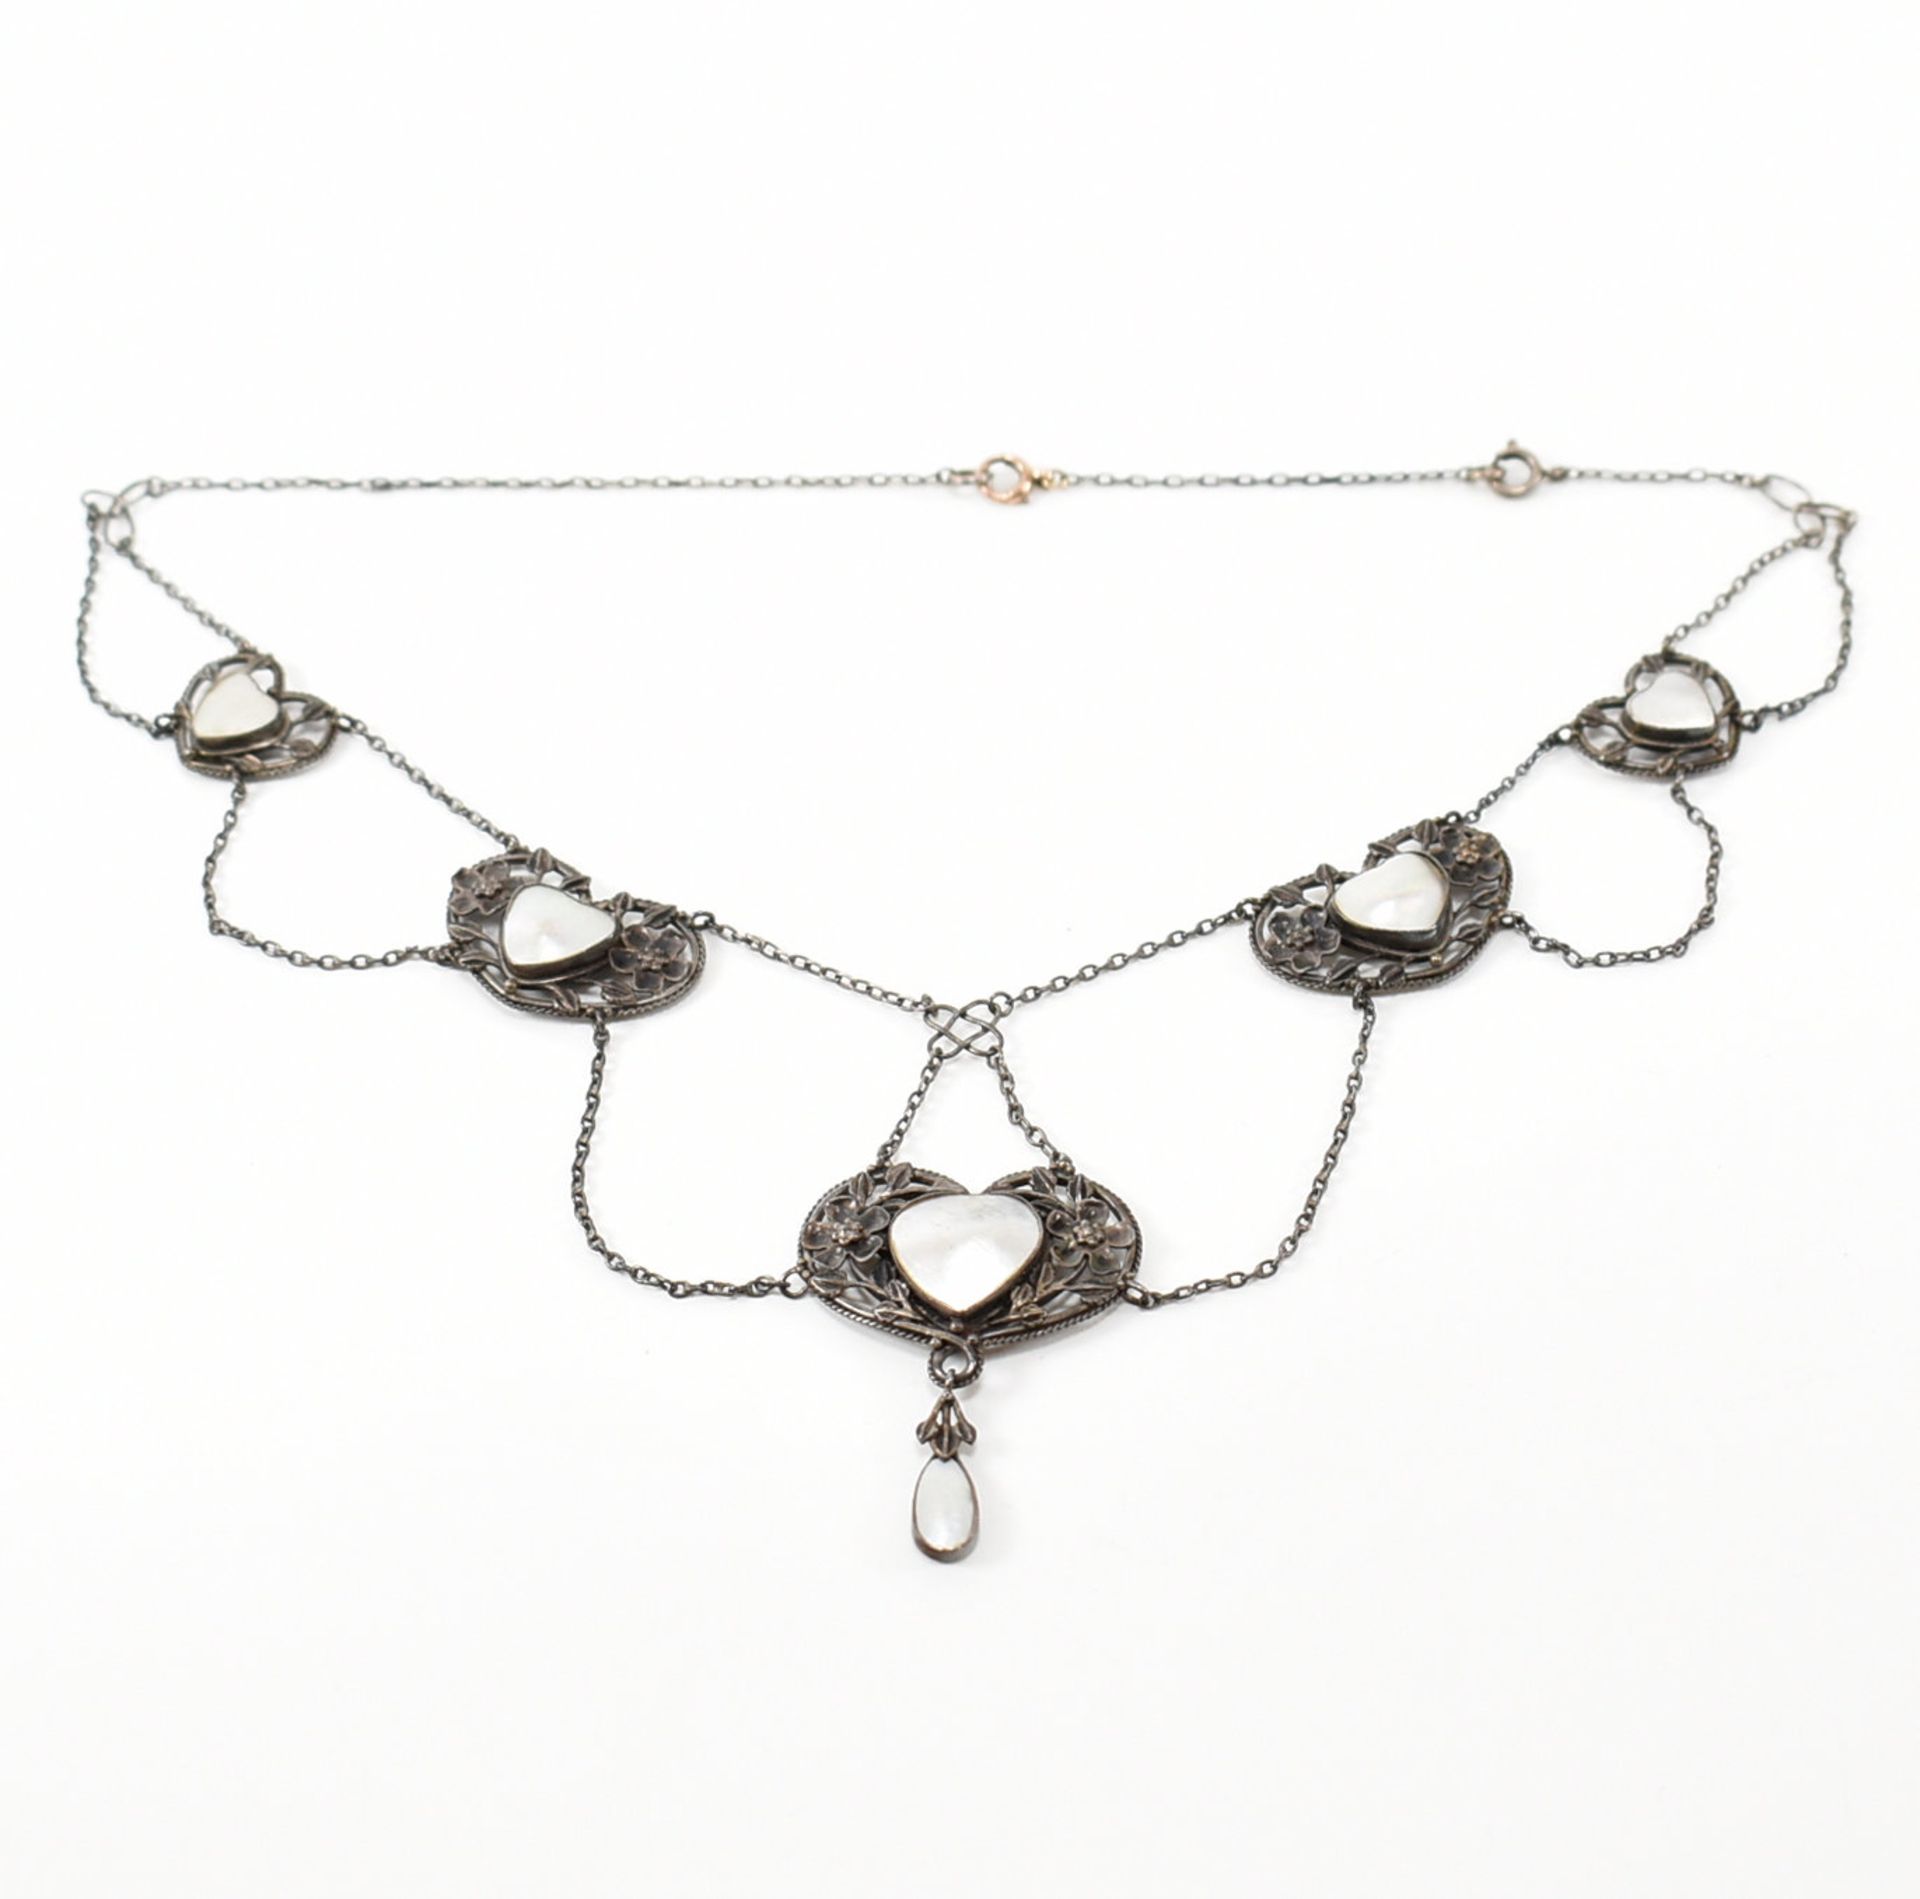 ARTS & CRAFTS SILVER & MOTHER OF PEARL HEART NECKLACE - Image 8 of 11